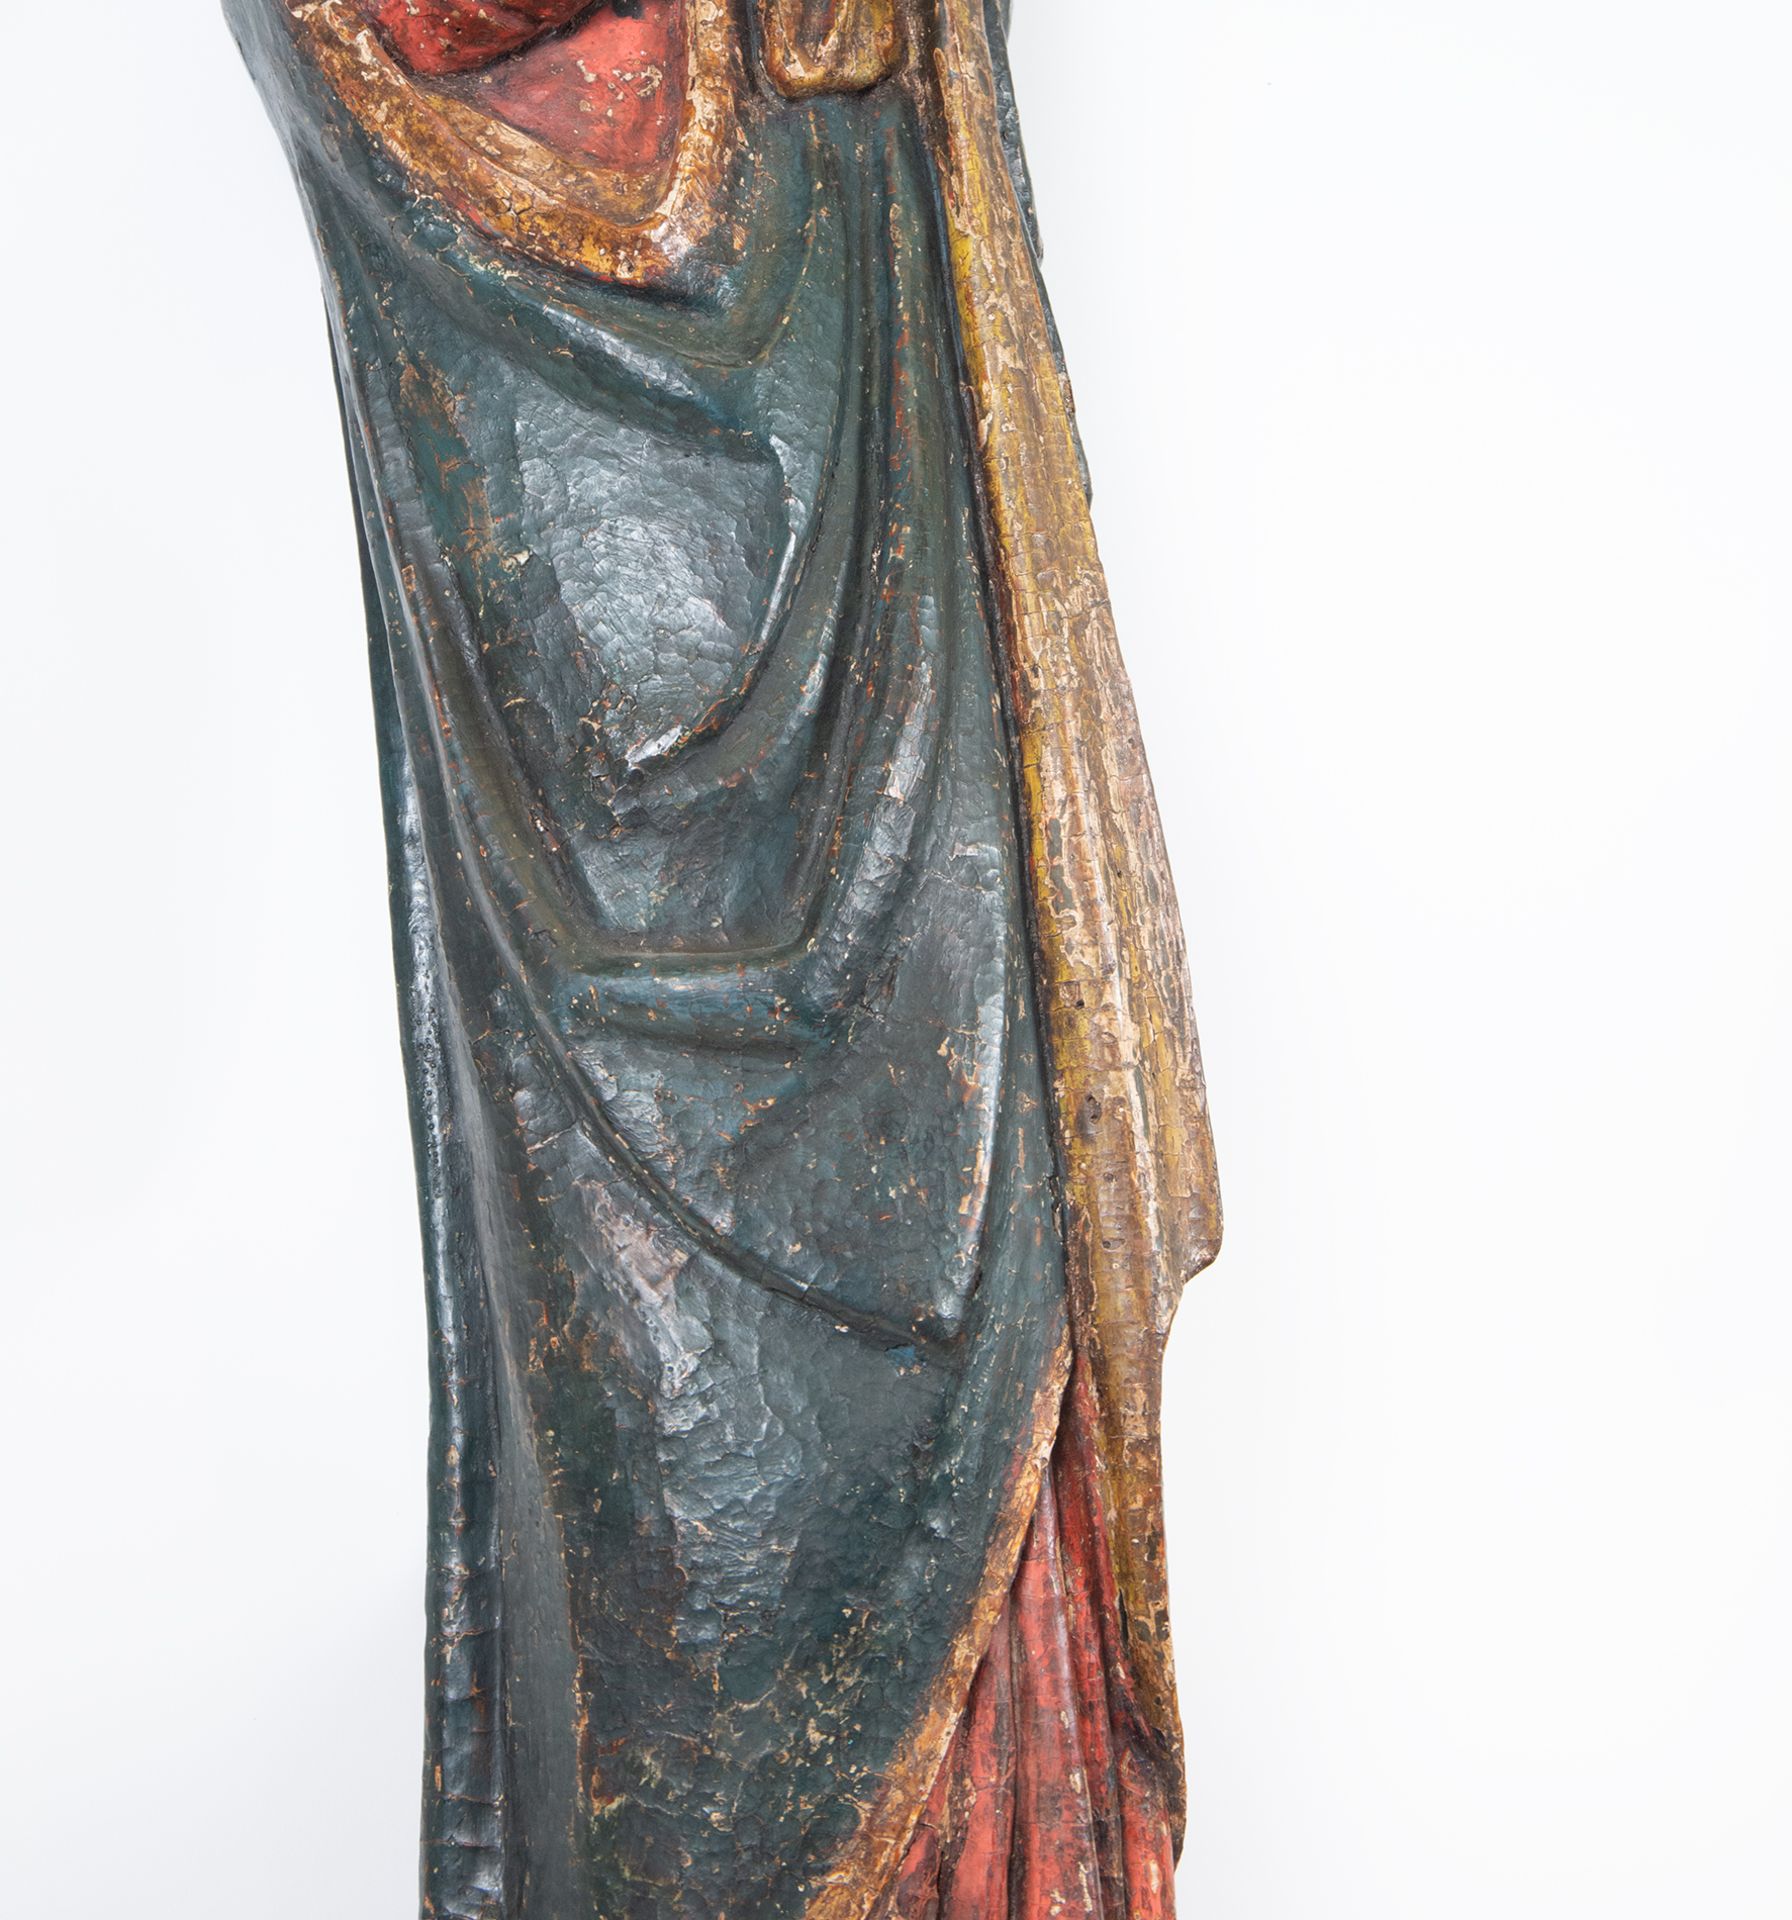 Pair of Large Romanesque Carvings representing Mary and Saint John the Evangelist, Romanesque School - Image 20 of 22